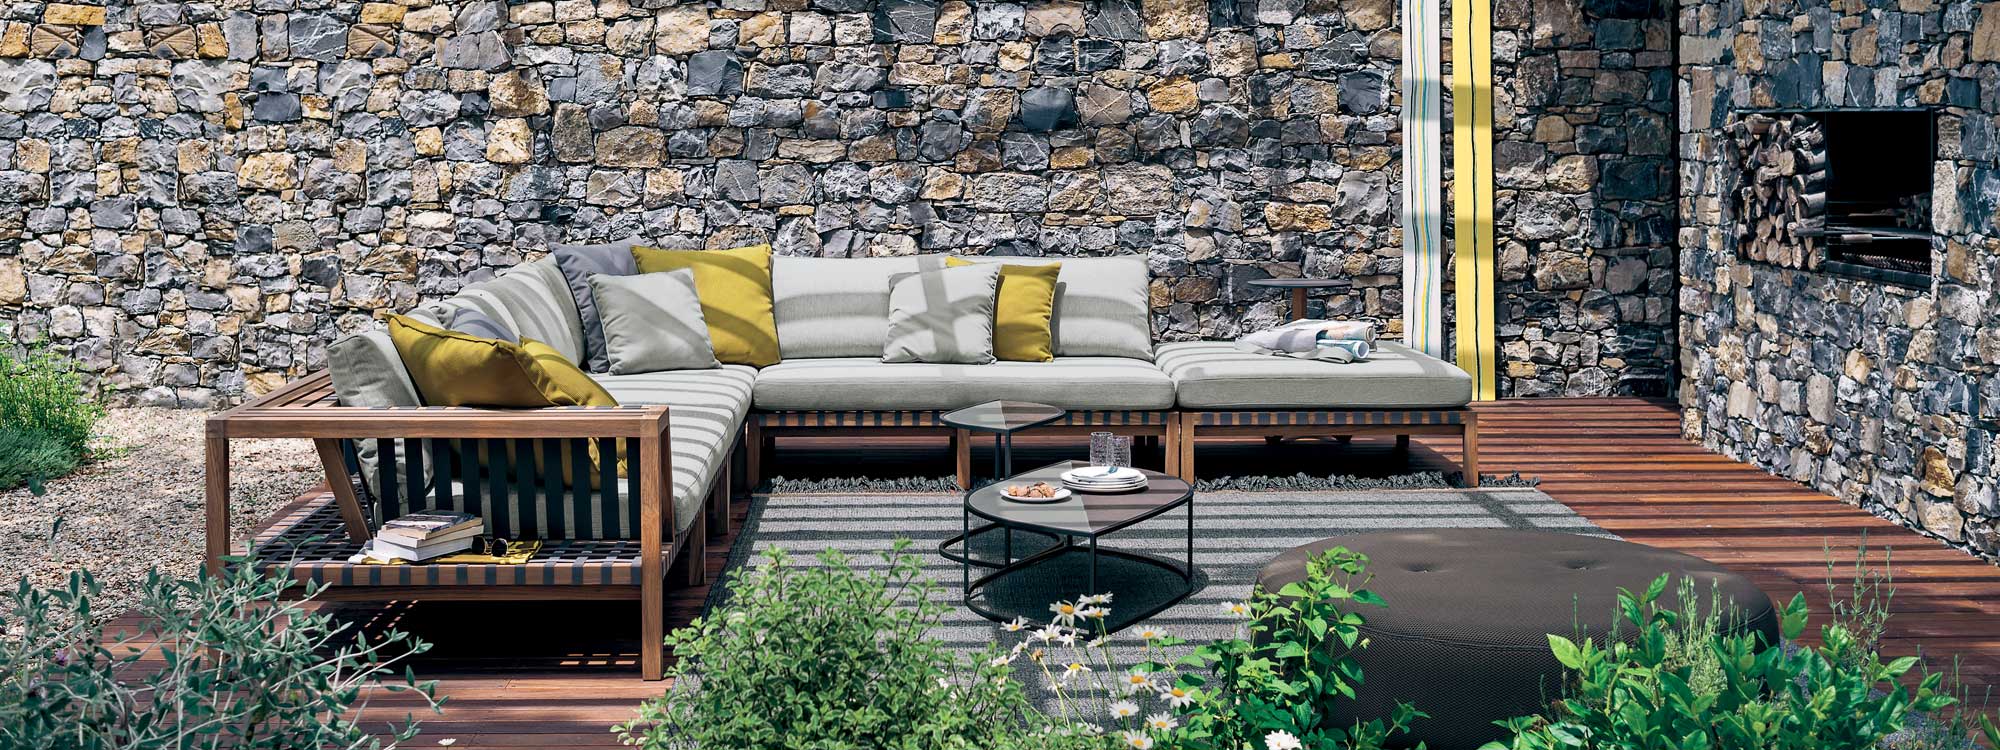 Network teak corner sofa and leaf outdoor low tables on patio